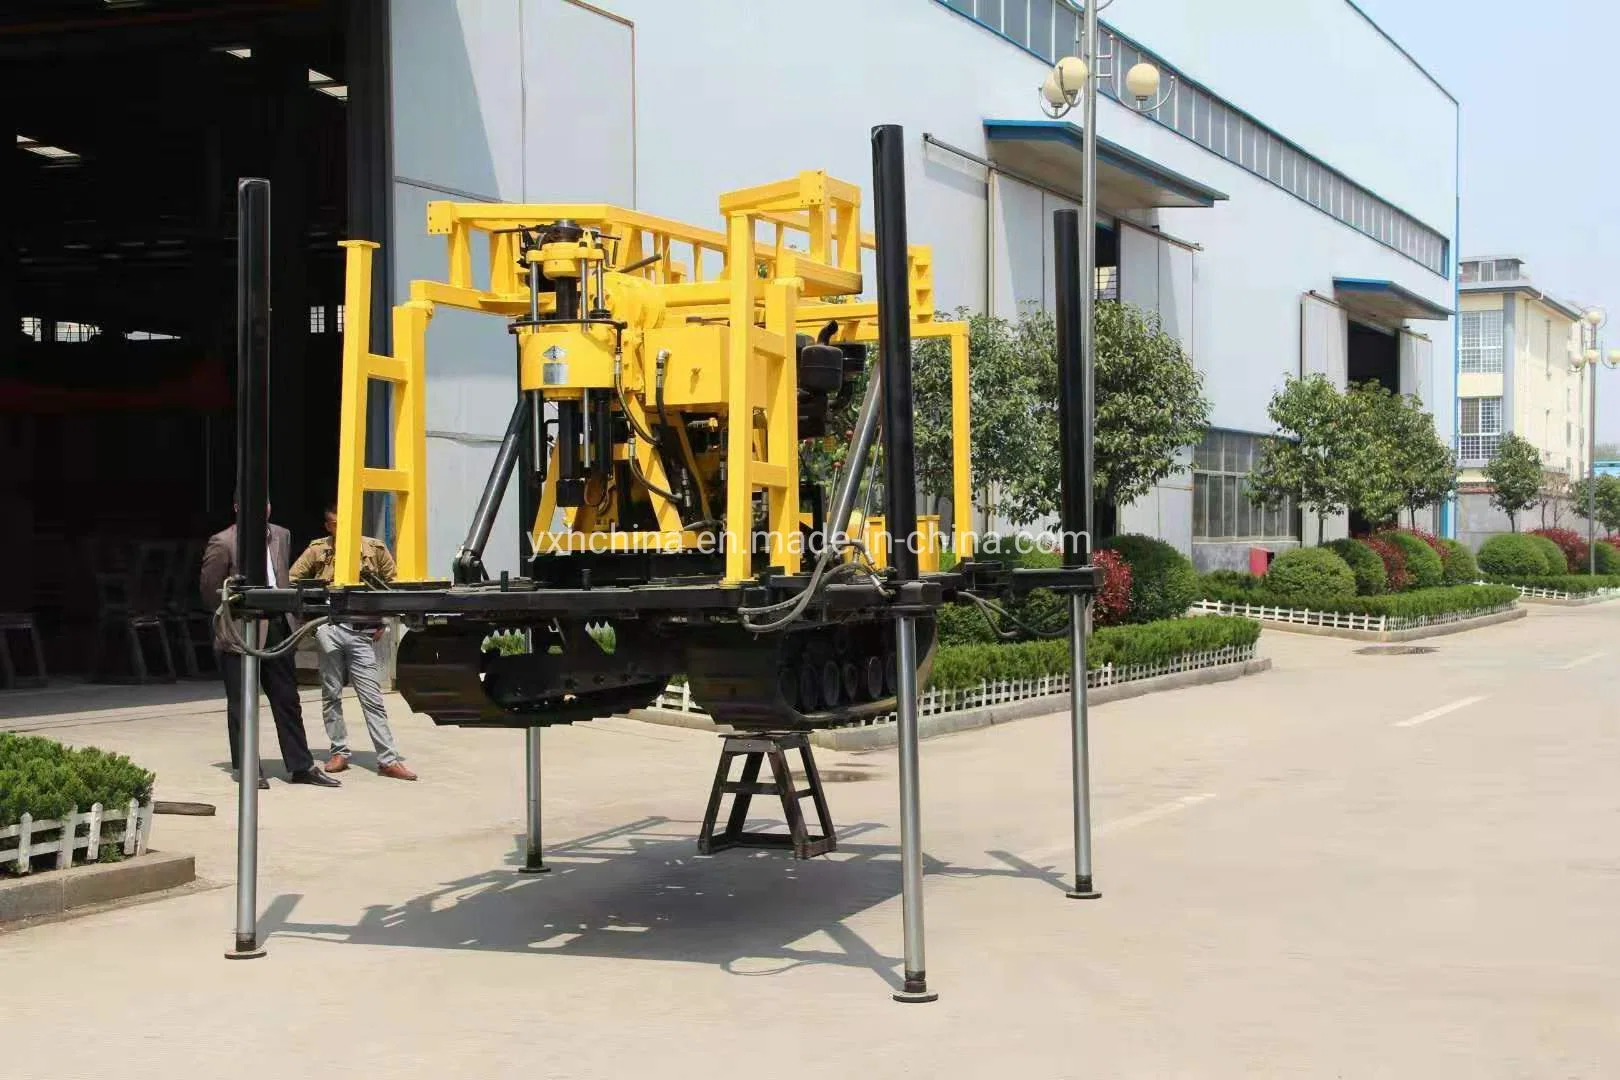 200m High Power Geological Survey Hard Rock Hydraulic Water Well Borehole Diamond Core Drilling Rig Machine with Mud Pump